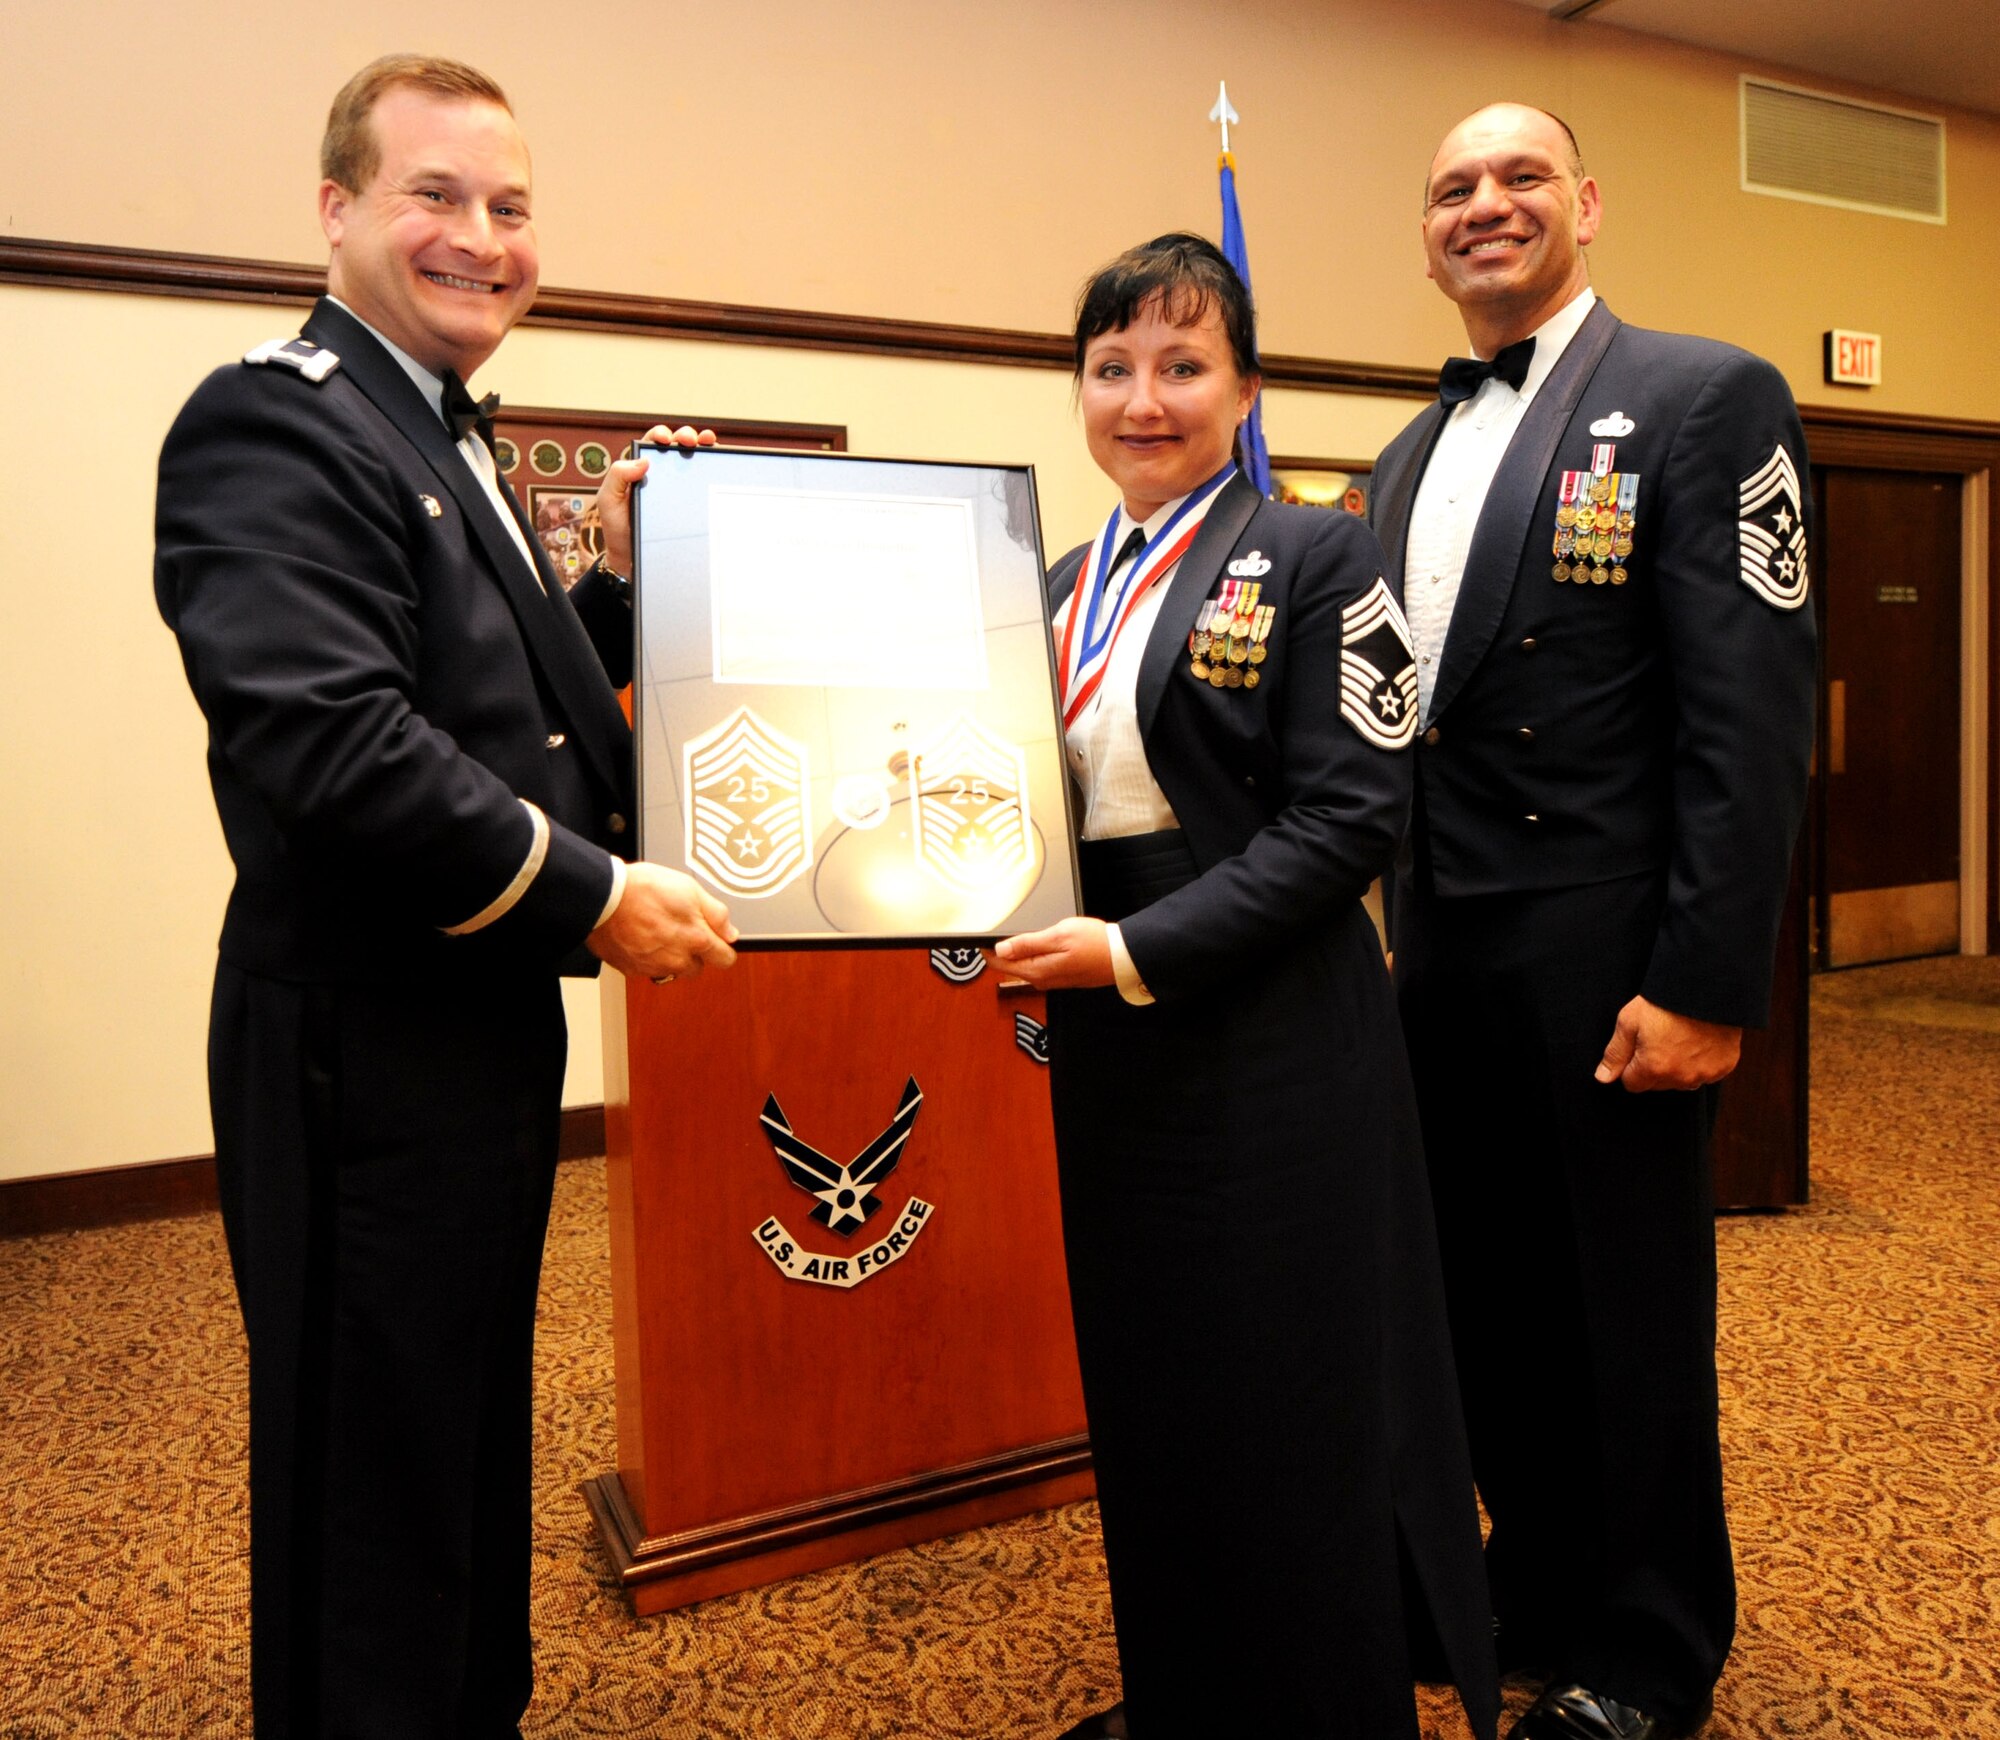 Col. Phil Stewart (left), 9th Reconnaissance Wing commander, and Chief Master Sgt. Robert White, 9th Reconnaissance Wing command chief, present Chief Master Sgt. Geri Dreibelbis, 9th Security Forces Squadron security forces manager, a plaque commemorating her promotion at the Recce Point Club on Beale Air Force Base, Calif., April 8, 2013. (U.S. Air Force photo by Airman 1st Class Bobby Cummings/Released)